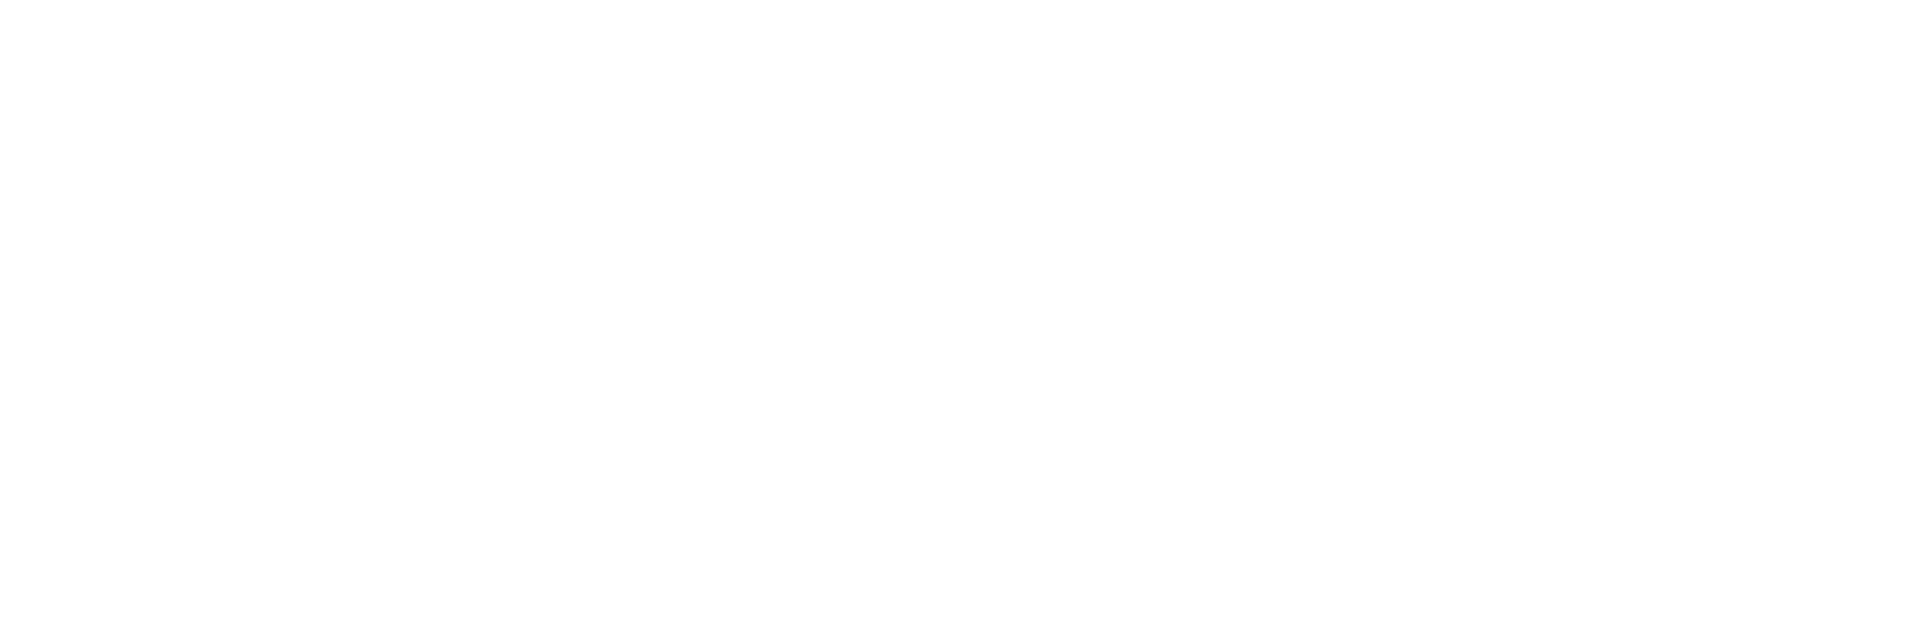 Abstract wave pattern of dotted lines - 8th pattern